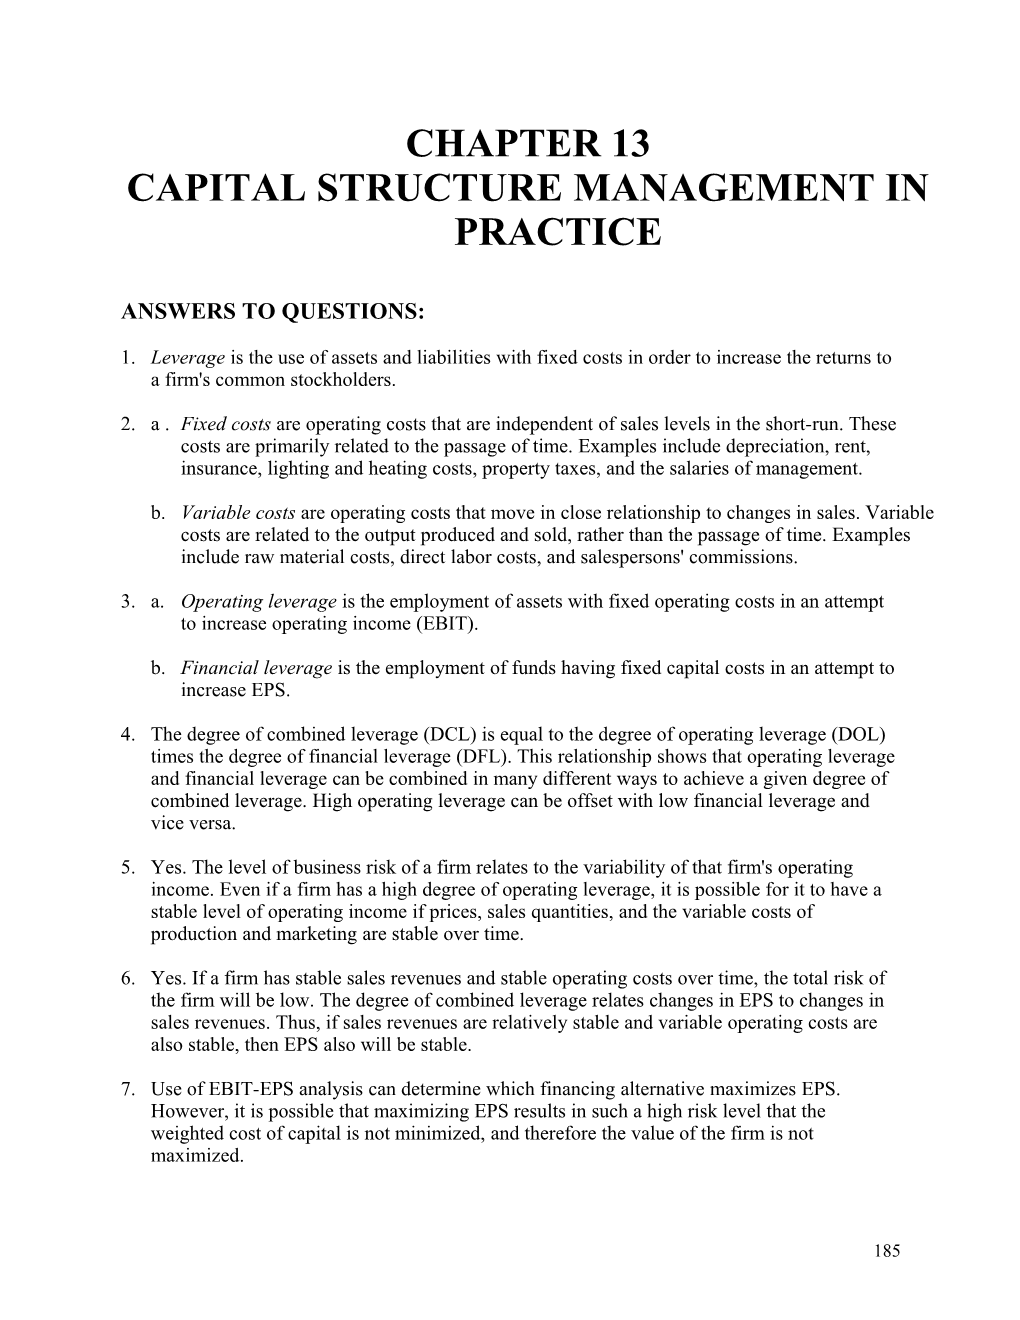 Capital Structure Management in Practice